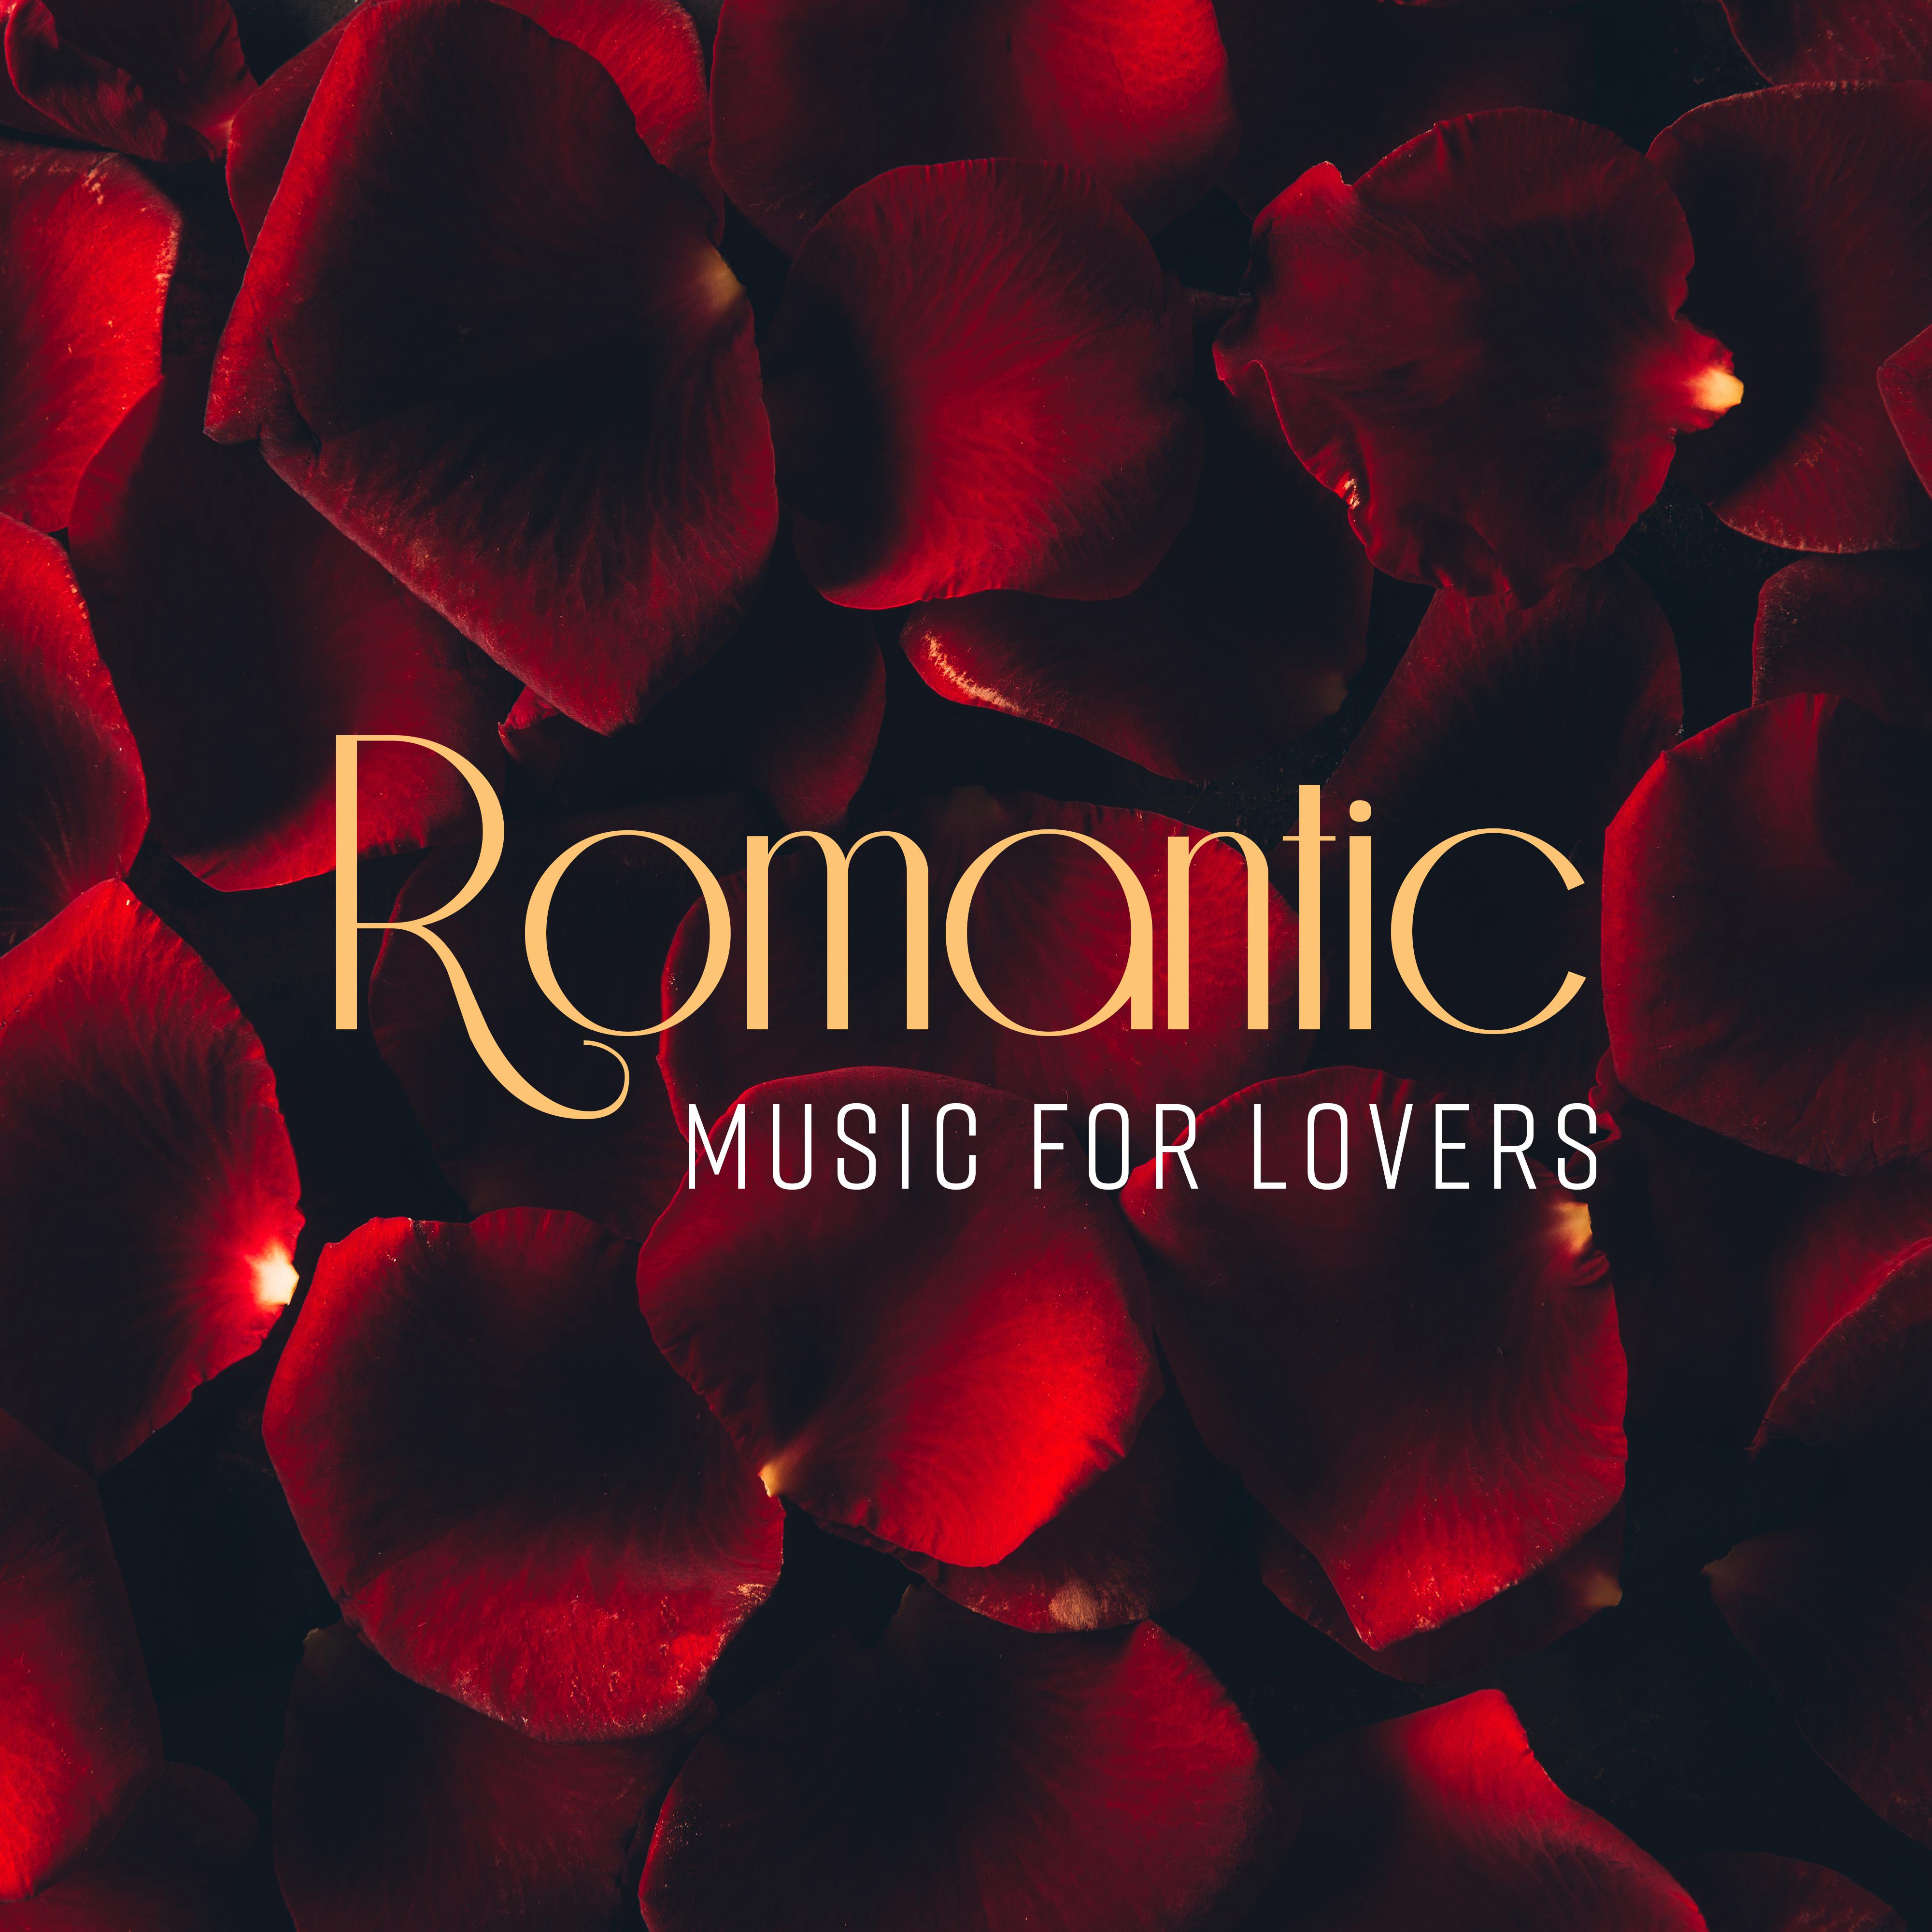 Romantic Music for Lovers